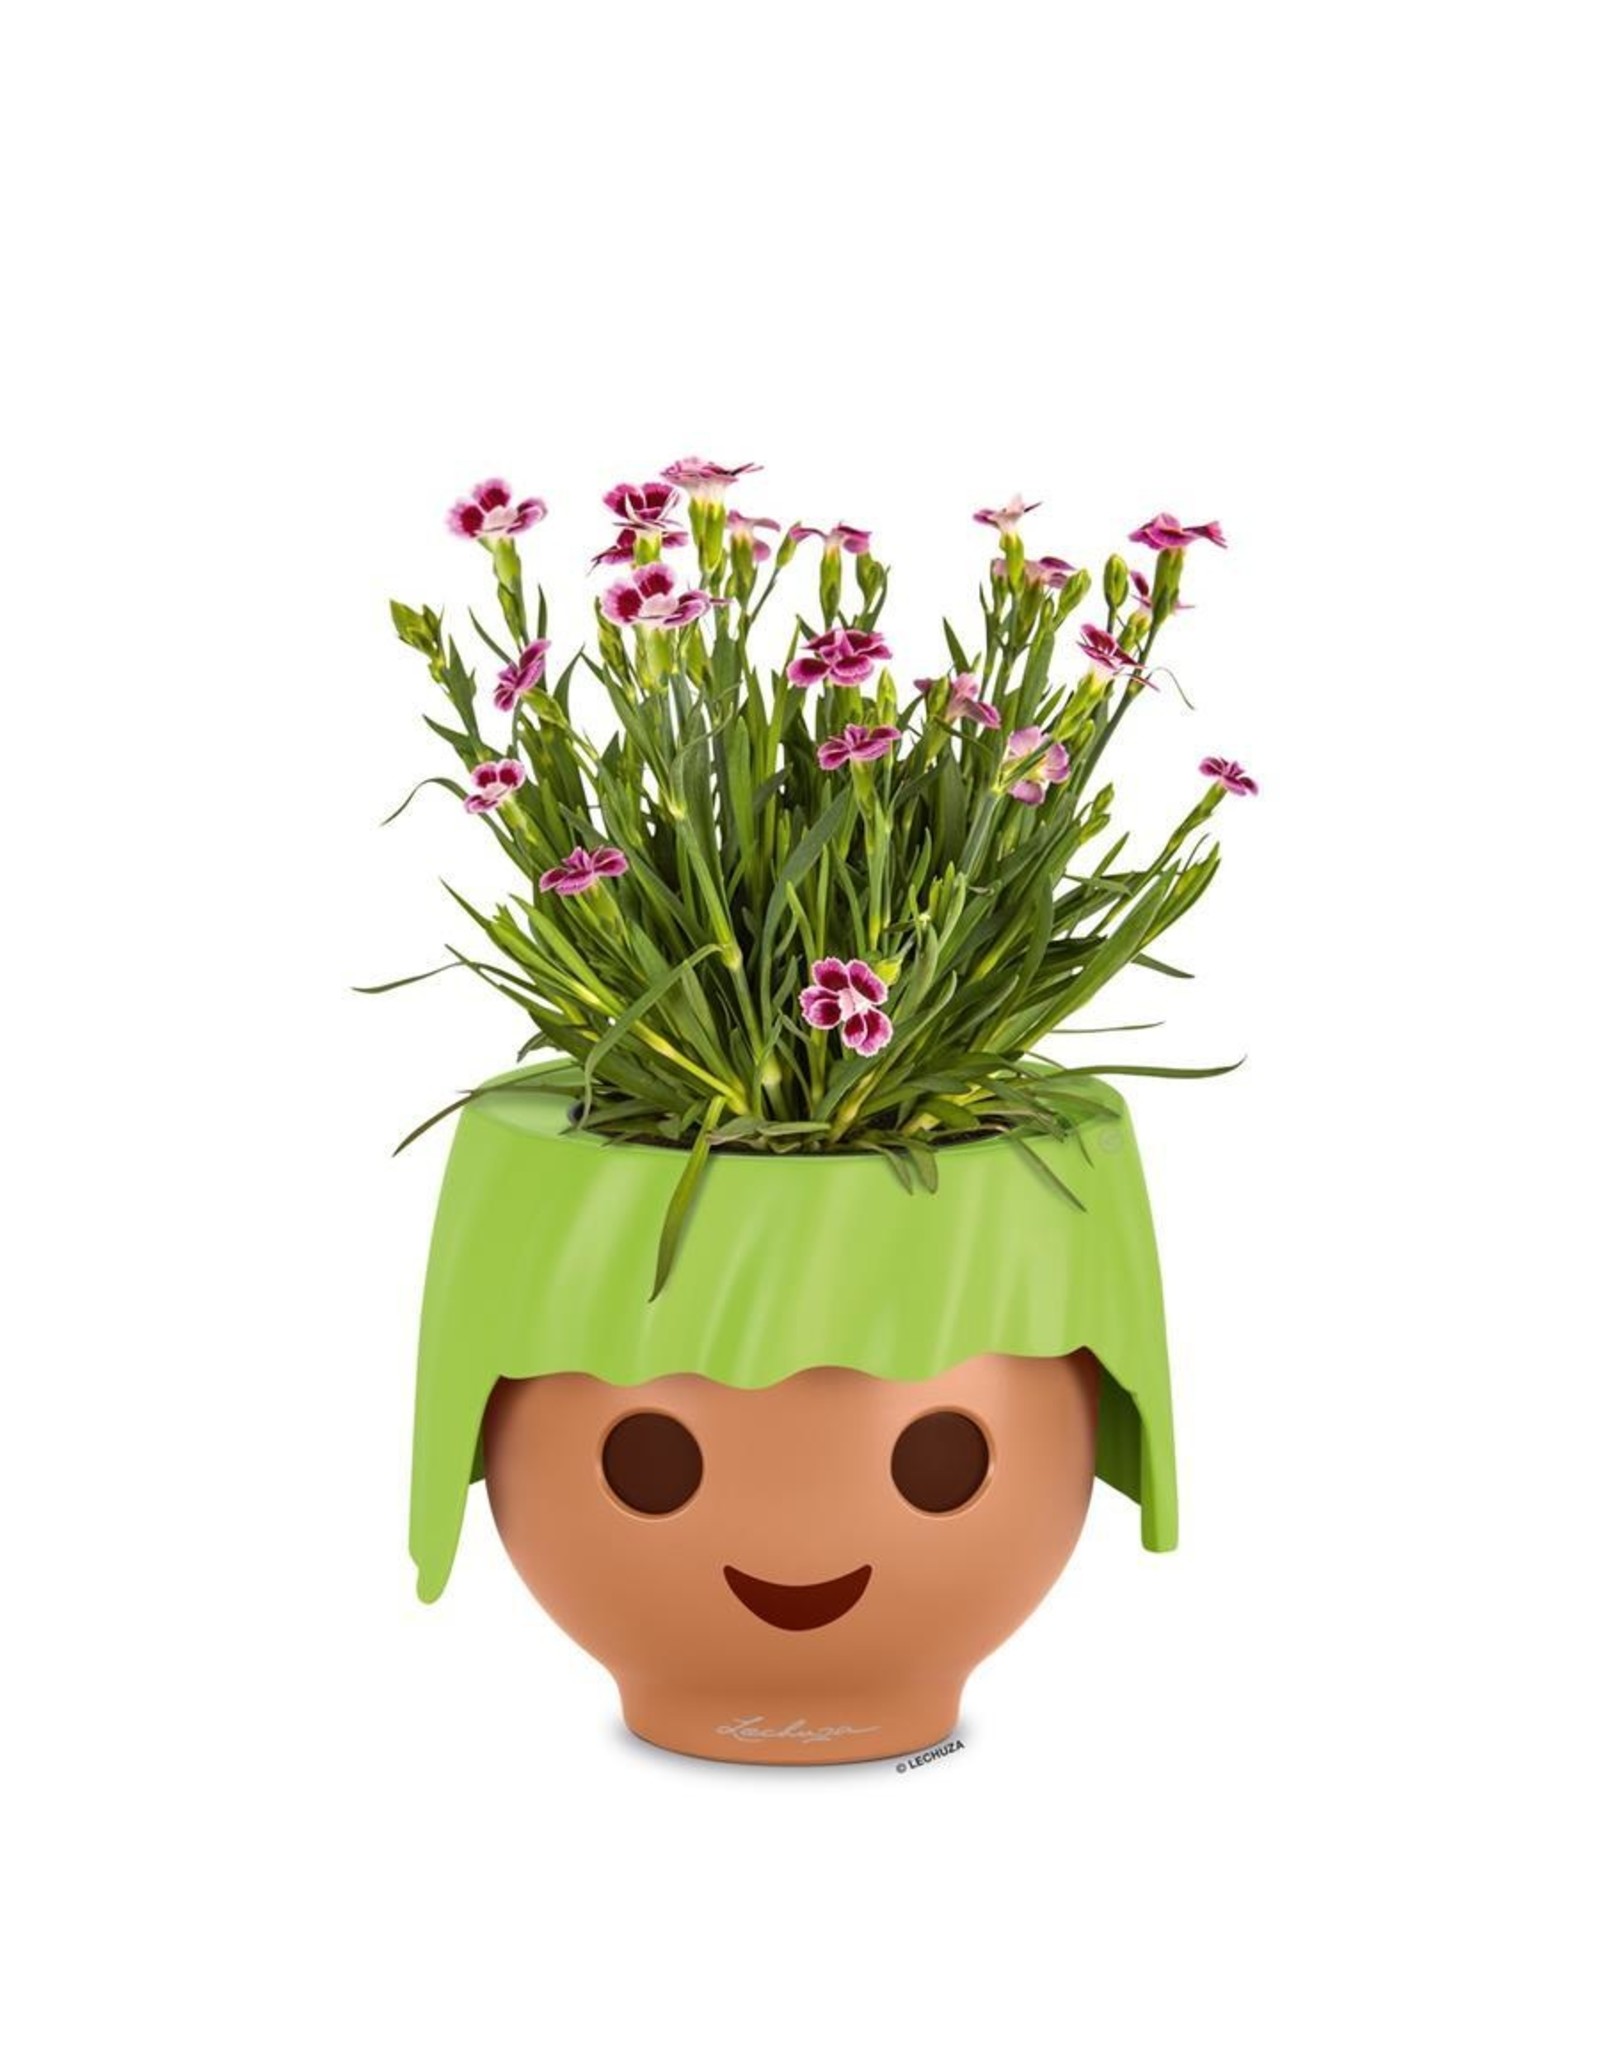 Playmobil OJO All in One Planter Apple Green